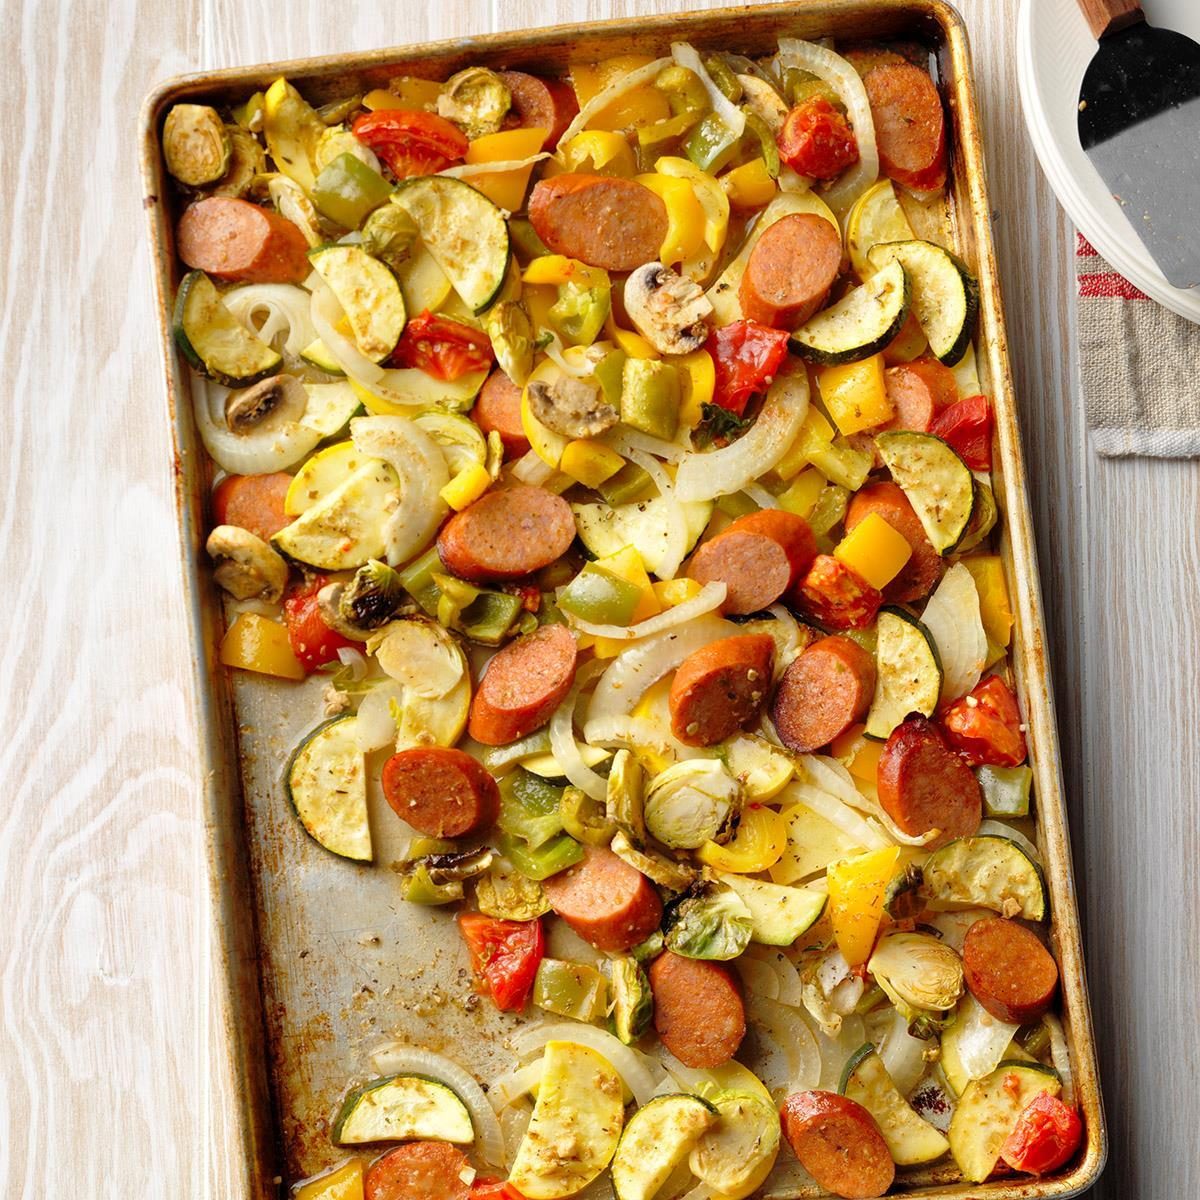 <p>This recipe is tasty and quick, and it can easily be doubled for last-minute dinner guests. Cook it in the oven or on the grill, and add the veggies of your choice. —Judy Batson, Tampa Florida</p> <div class="listicle-page__buttons"> <div class="listicle-page__cta-button"><a href='https://www.tasteofhome.com/recipes/smoked-sausage-and-veggie-sheet-pan-supper/'>Go to Recipe</a></div> </div>